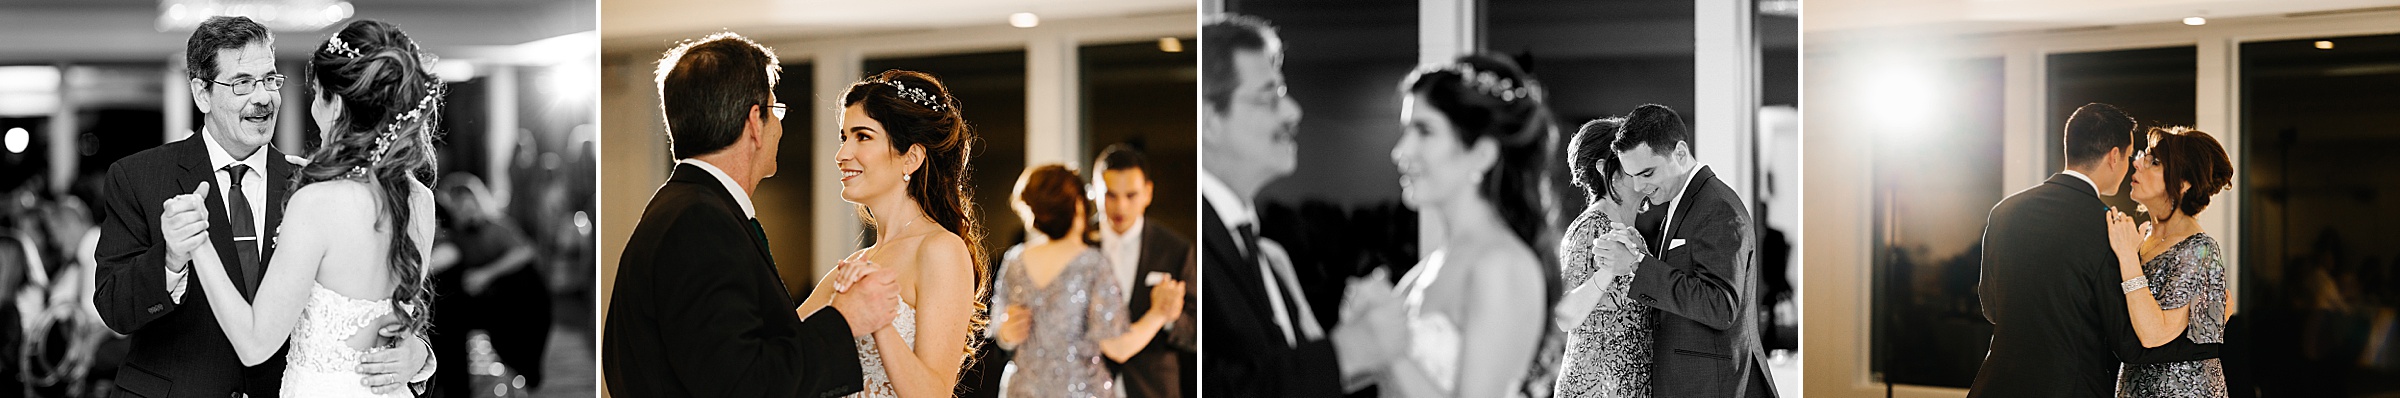 father daughter dance; mother son dance by Detroit Wedding Photographer Michele Maloney